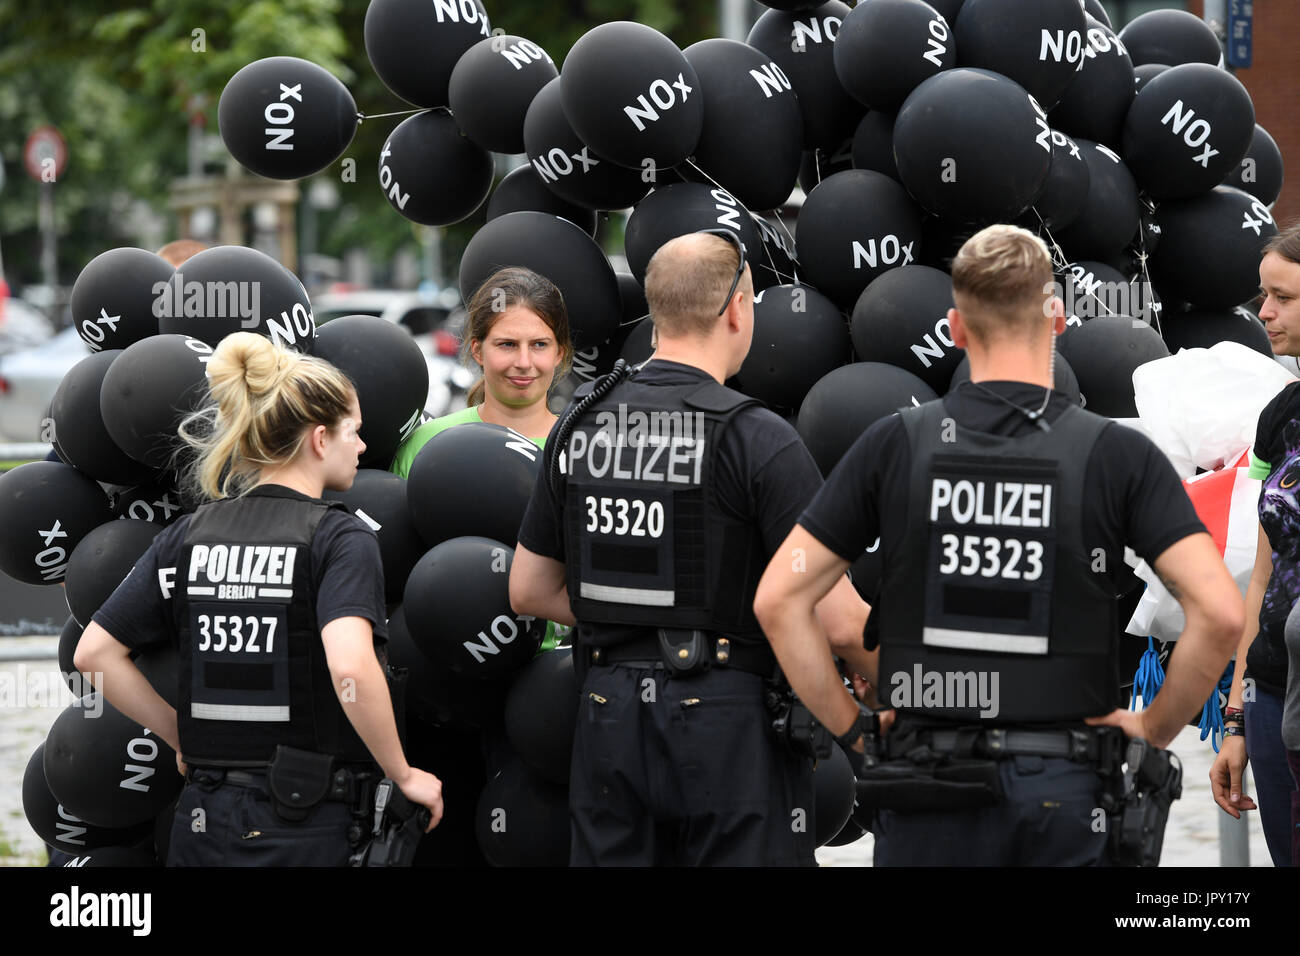 Berlin, Germany. 2nd Aug, 2017. dpatop - Greenpeace activists protest in front of the Ministry of Transport after a summit on diesel and the reduction of harmful emmissions on August 2, 2017 in Berlin, Germany. The abbreviation NOx on the balloons stands for nitrogen oxide, which is released in high concentration by some diesel motors. It can act as a respiratory poison. Credit: dpa picture alliance/Alamy Live News Stock Photo